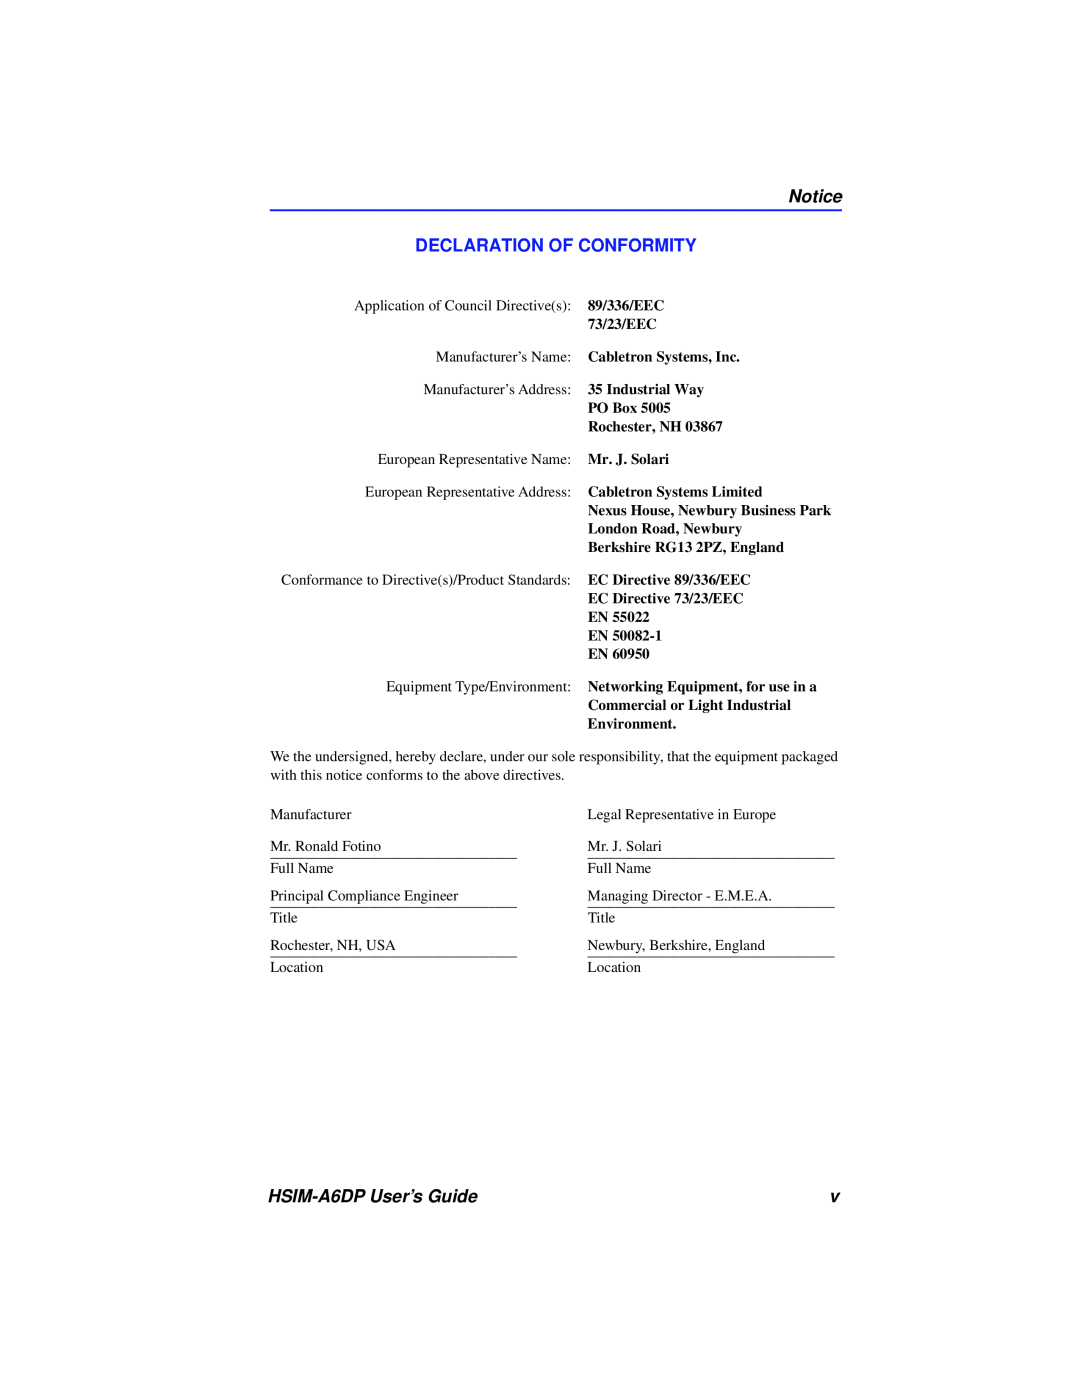 Cabletron Systems manual Declaration Of Conformity, HSIM-A6DP User’s Guide, Manufacturer’s Name Cabletron Systems, Inc 